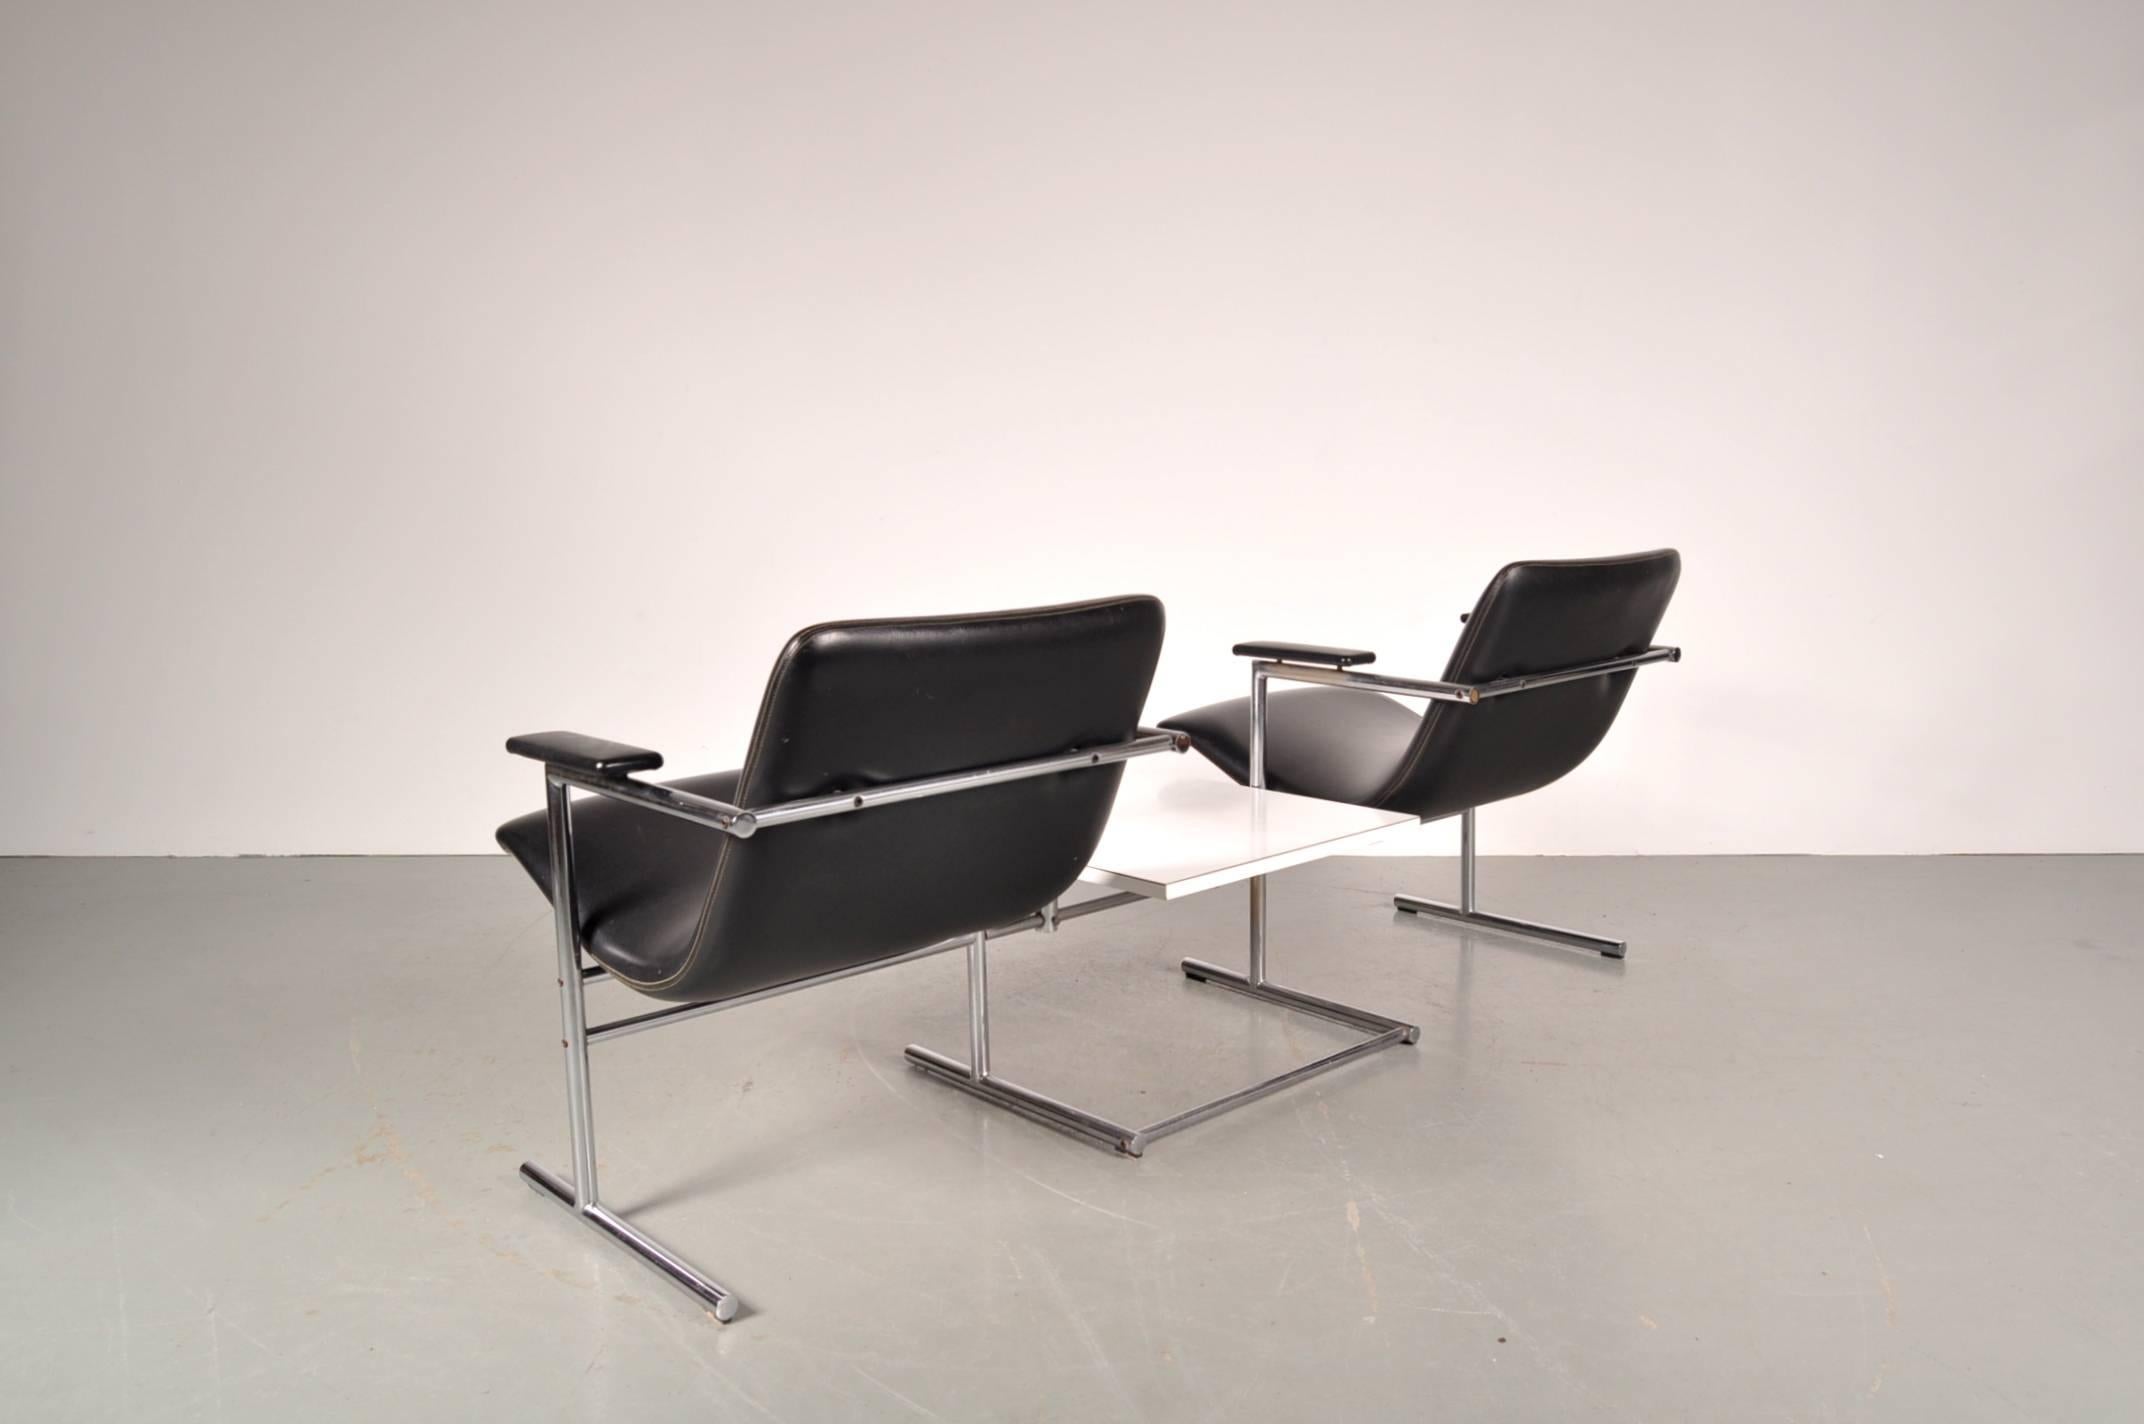 Stunning tandem seating with table designed by Rudi Verelst for Novalux in Belgium, circa 1960.

This rare piece contains two chairs with a table in the middle. The whole unit has a chrome metal base. The chairs and armrests are upholstered in